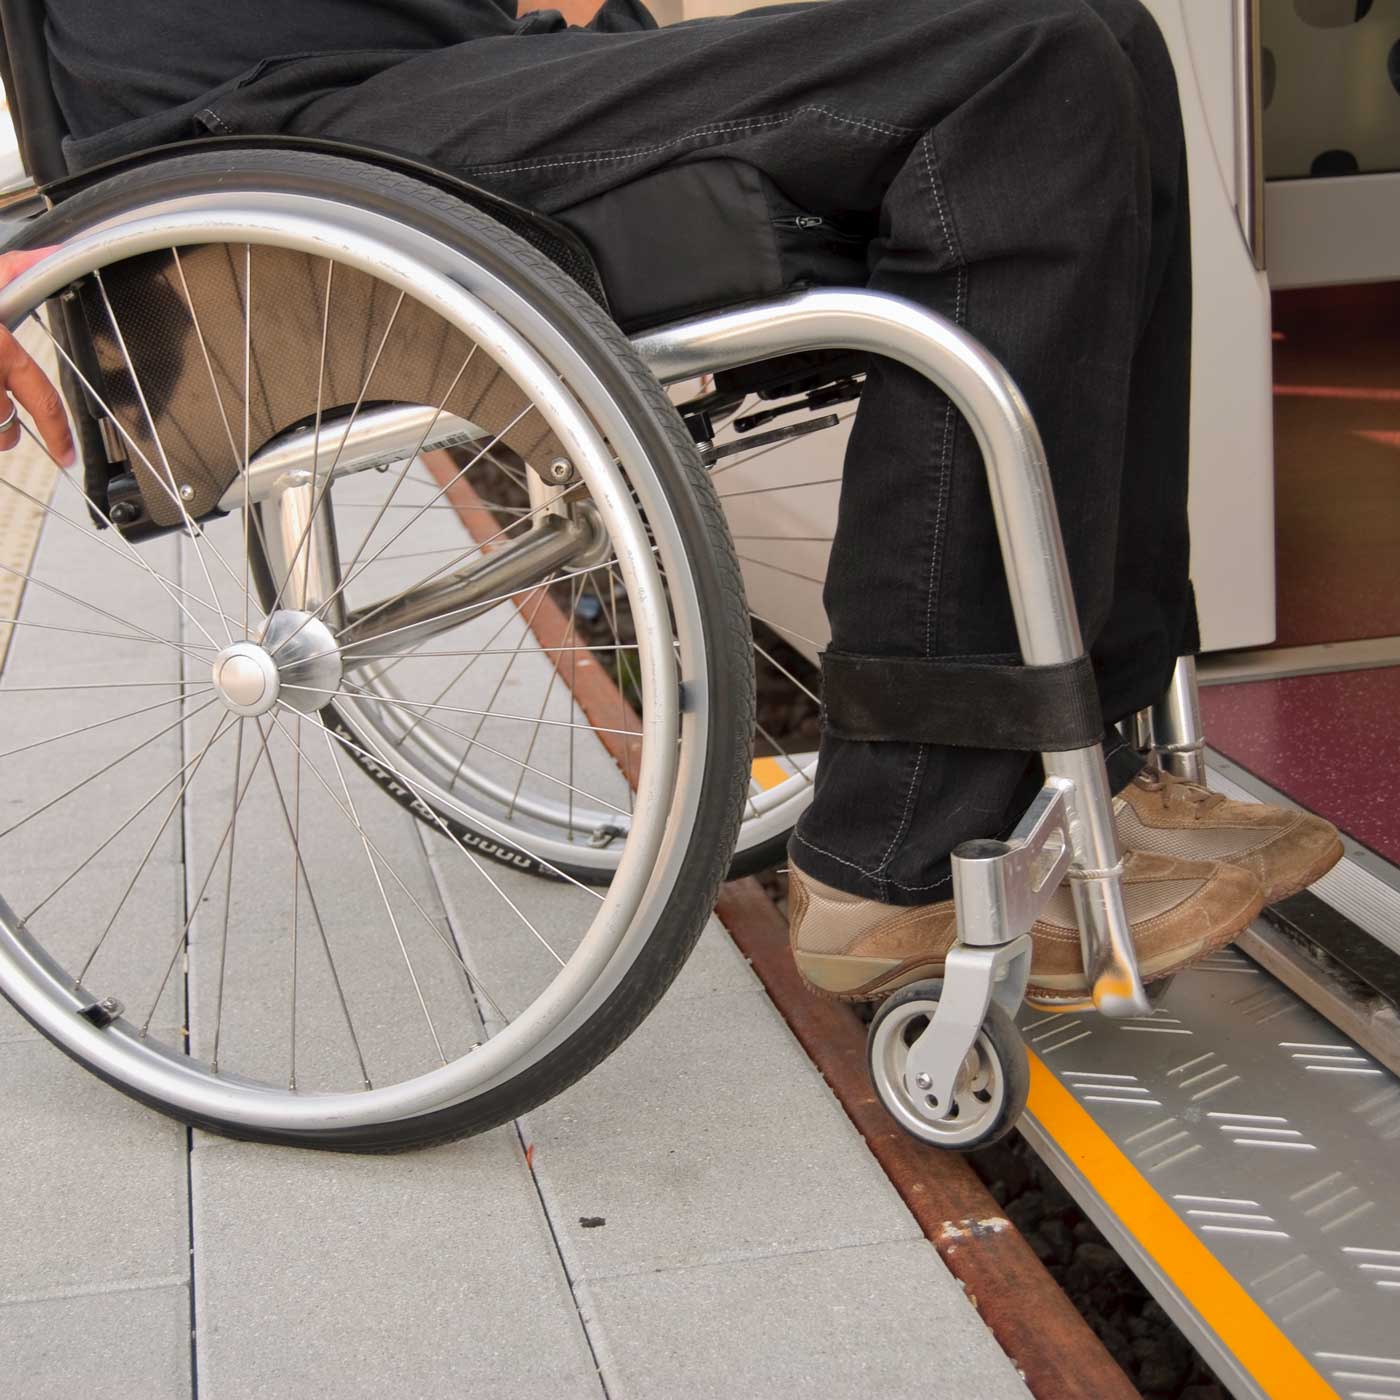 Have your say: Review of the Disability Standards for Accessible Public Transport